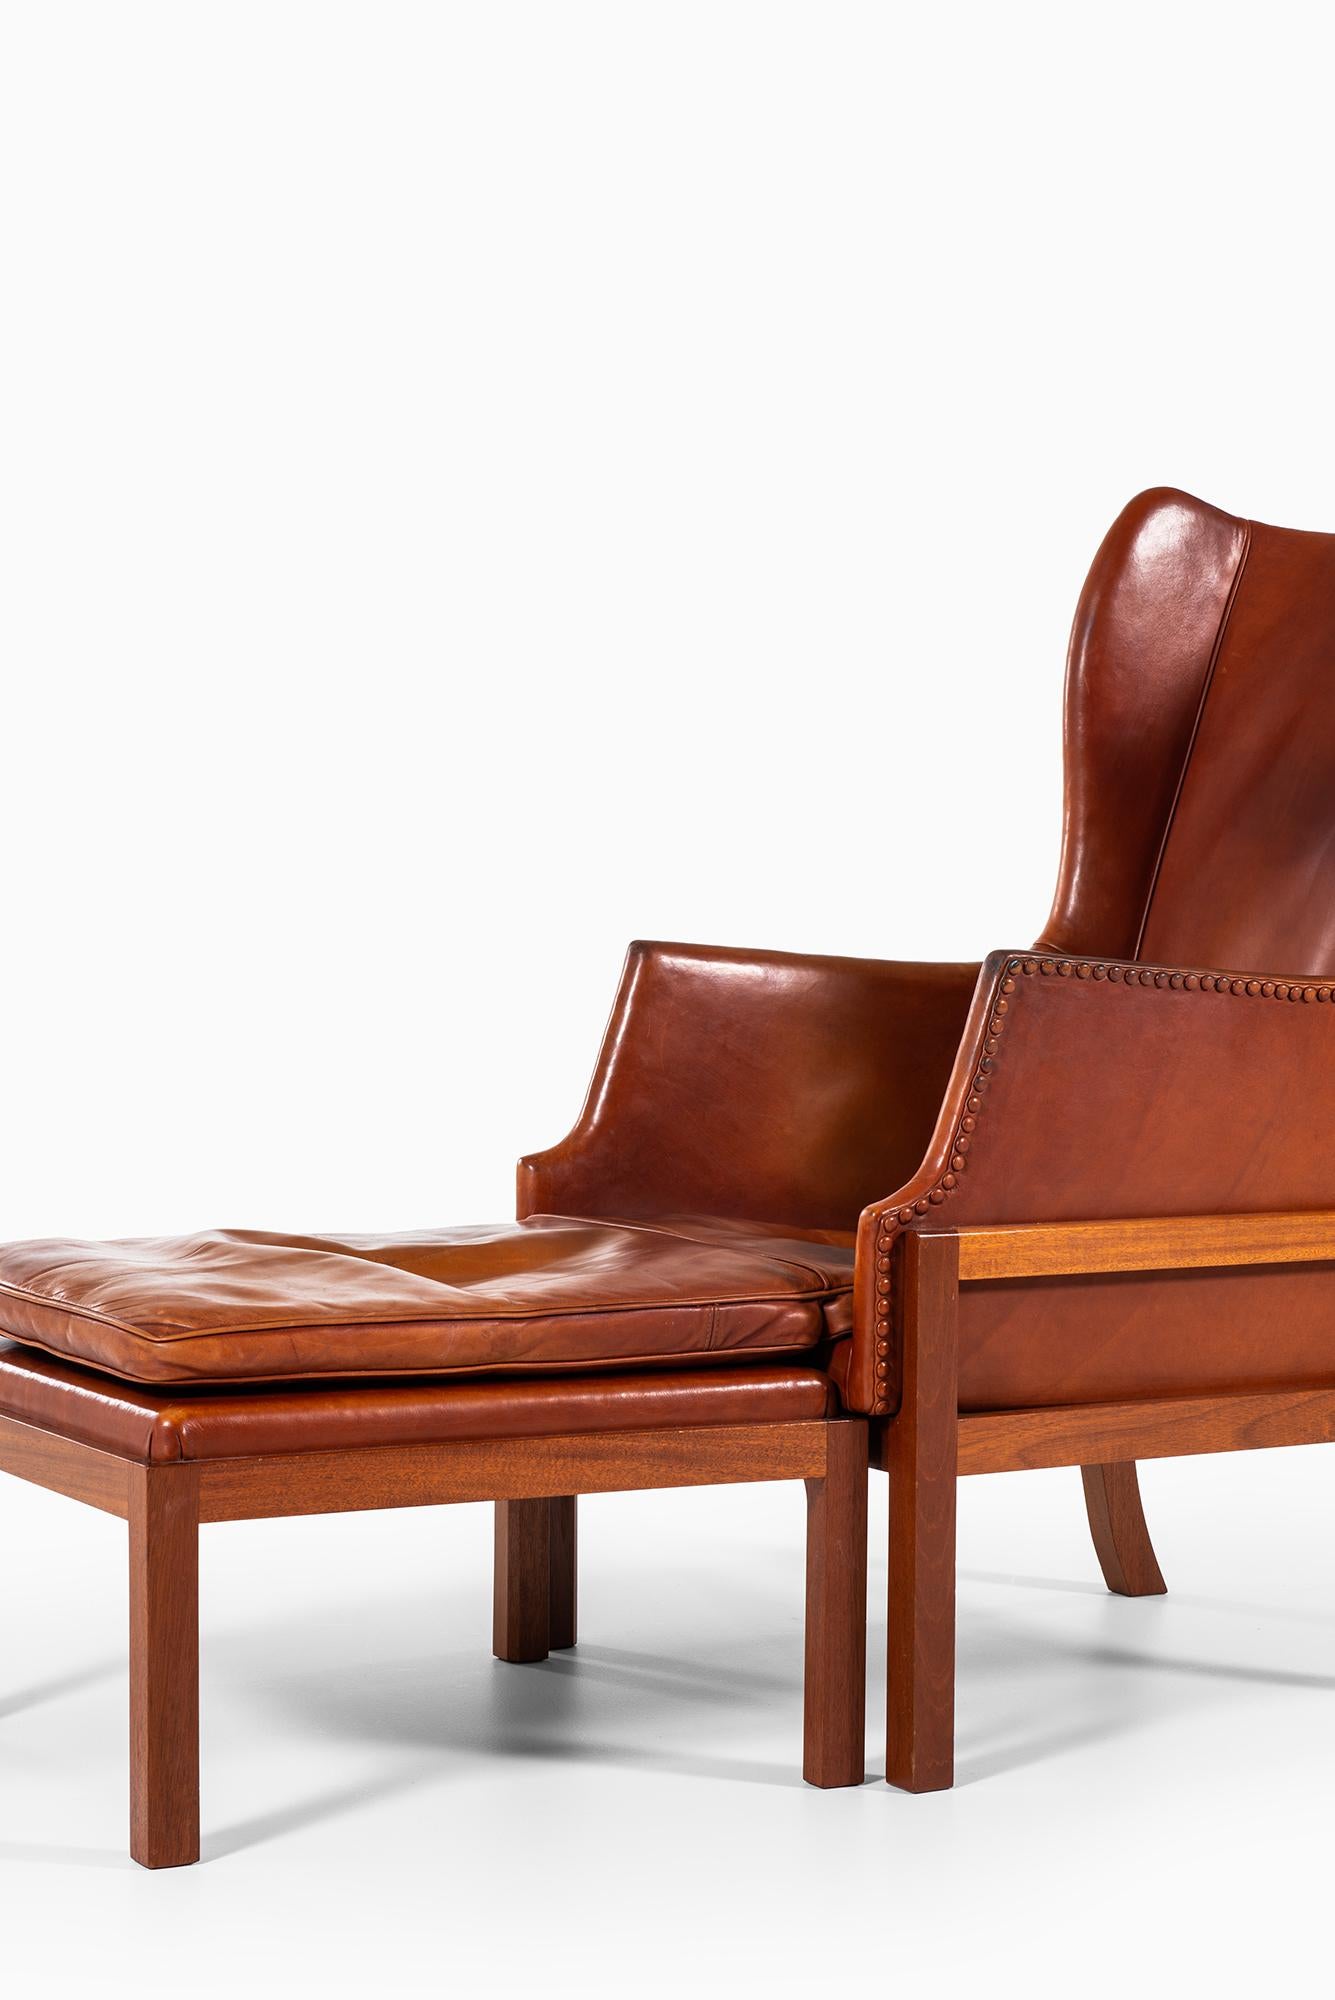 Very rare wingback easy chair with stool designed by Mogens Koch. Produced by cabinetmaker Rud Rasmussen in Denmark.